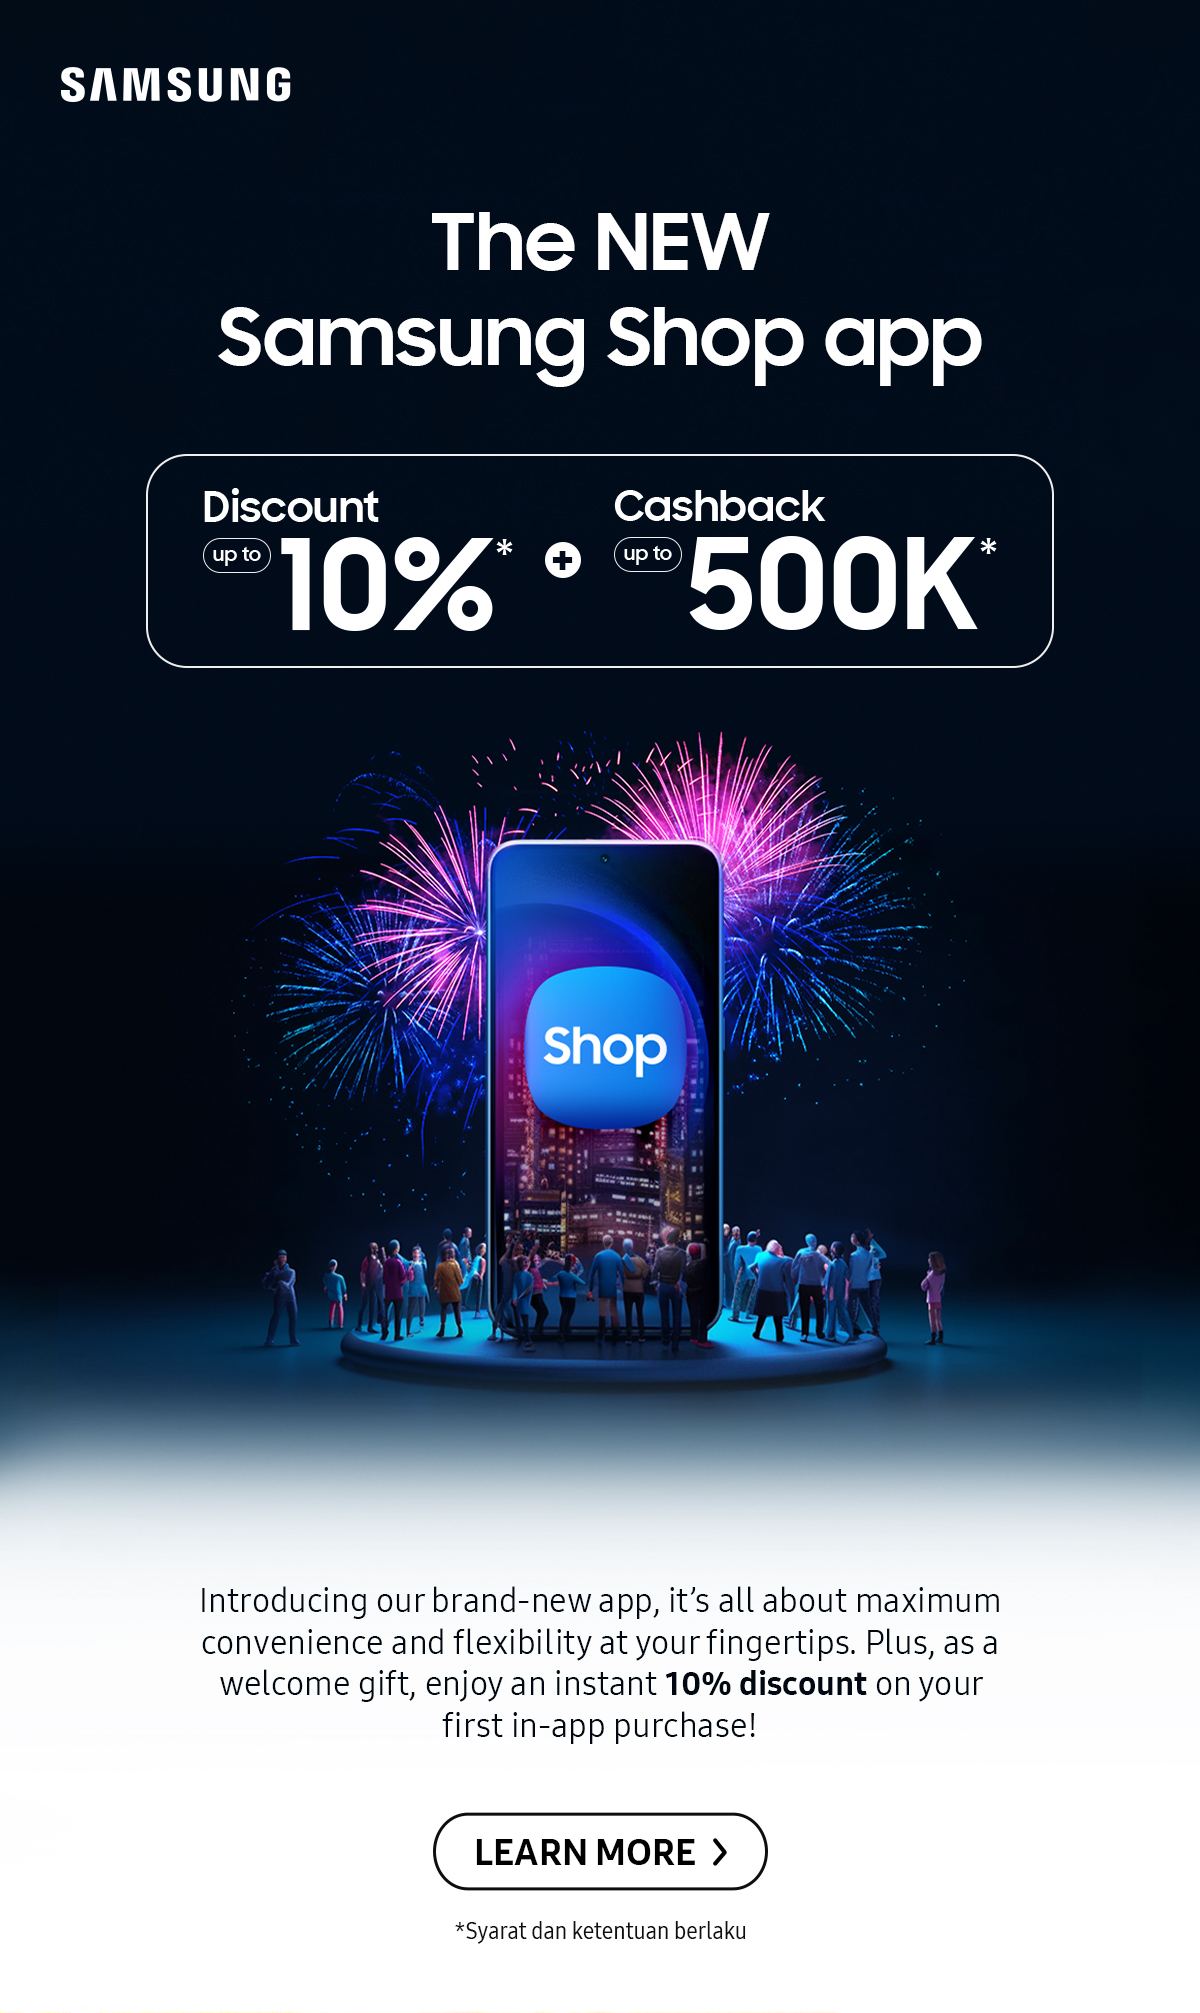 The NEW Samsung Shop app | Introducing our brand-new app, it's all about maximum convenience and flexibility at your fingetips. Plus, as a welcome gift, enjoy an instant 10% discount on your first in-app purchase! Click here to learn more!